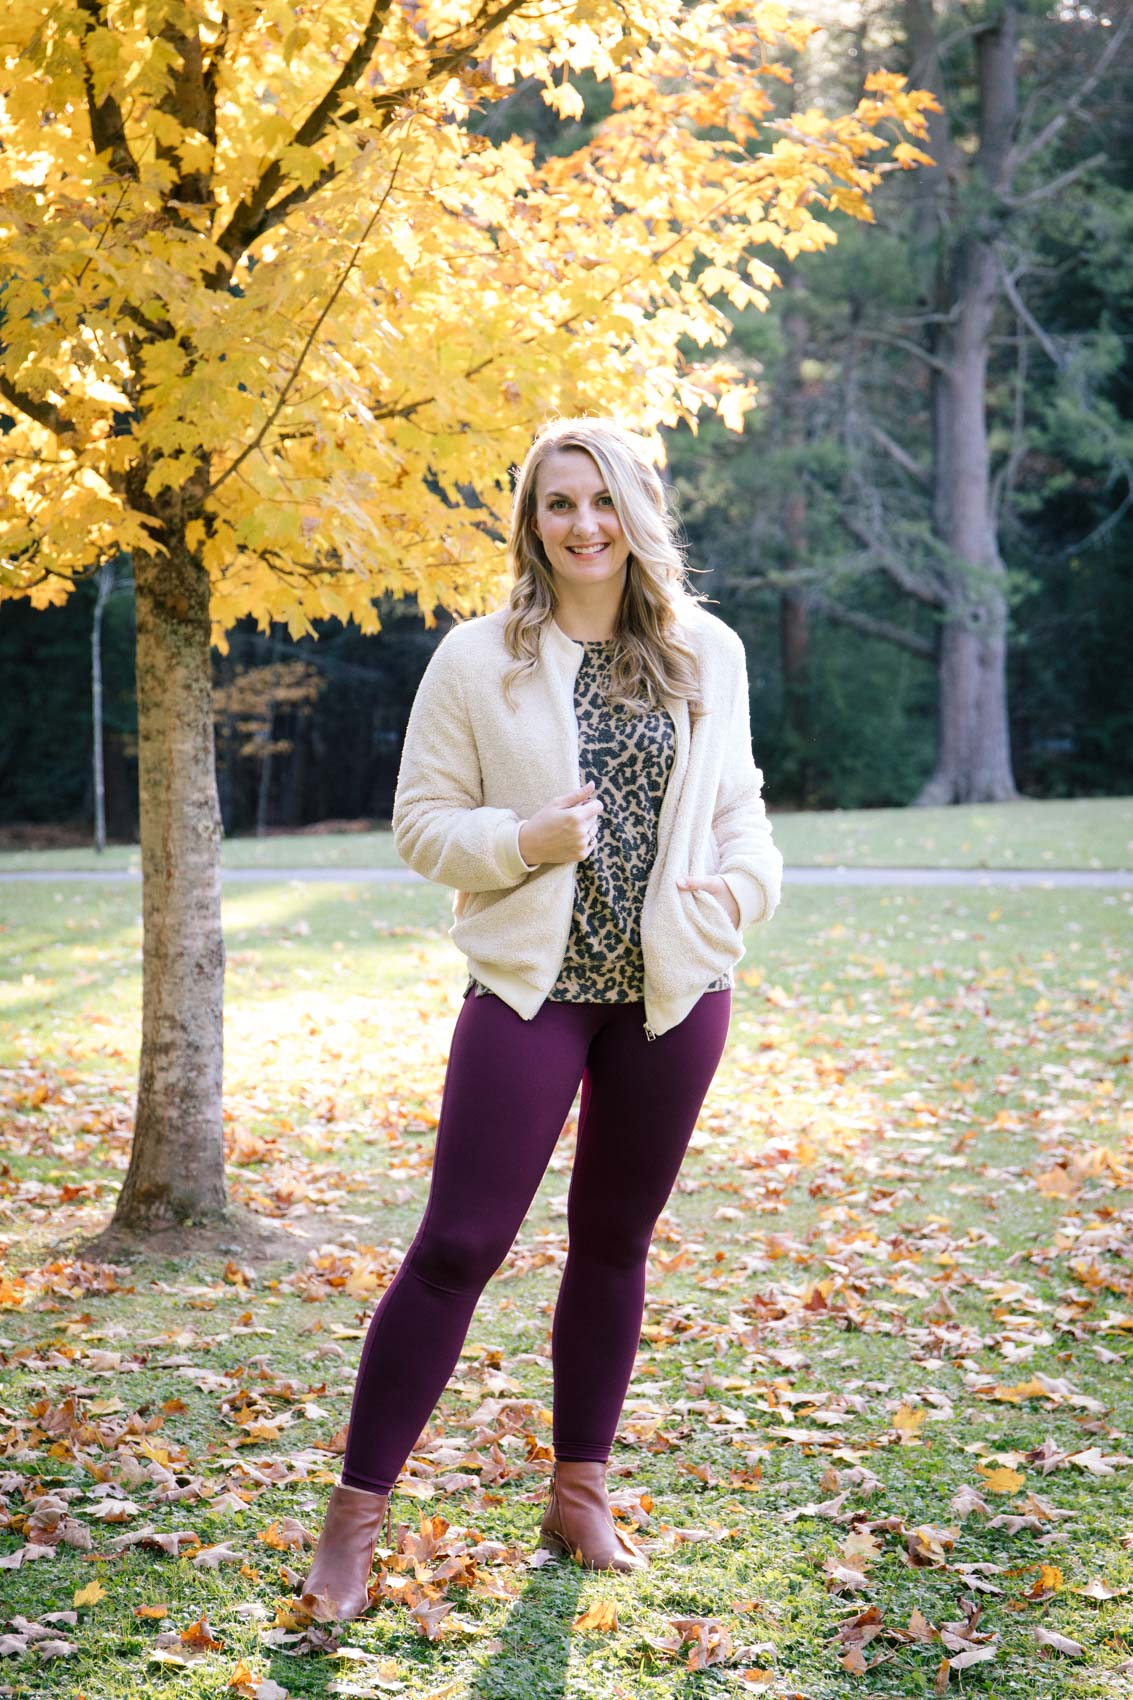 Beige Leggings Fall Outfits (3 ideas & outfits)